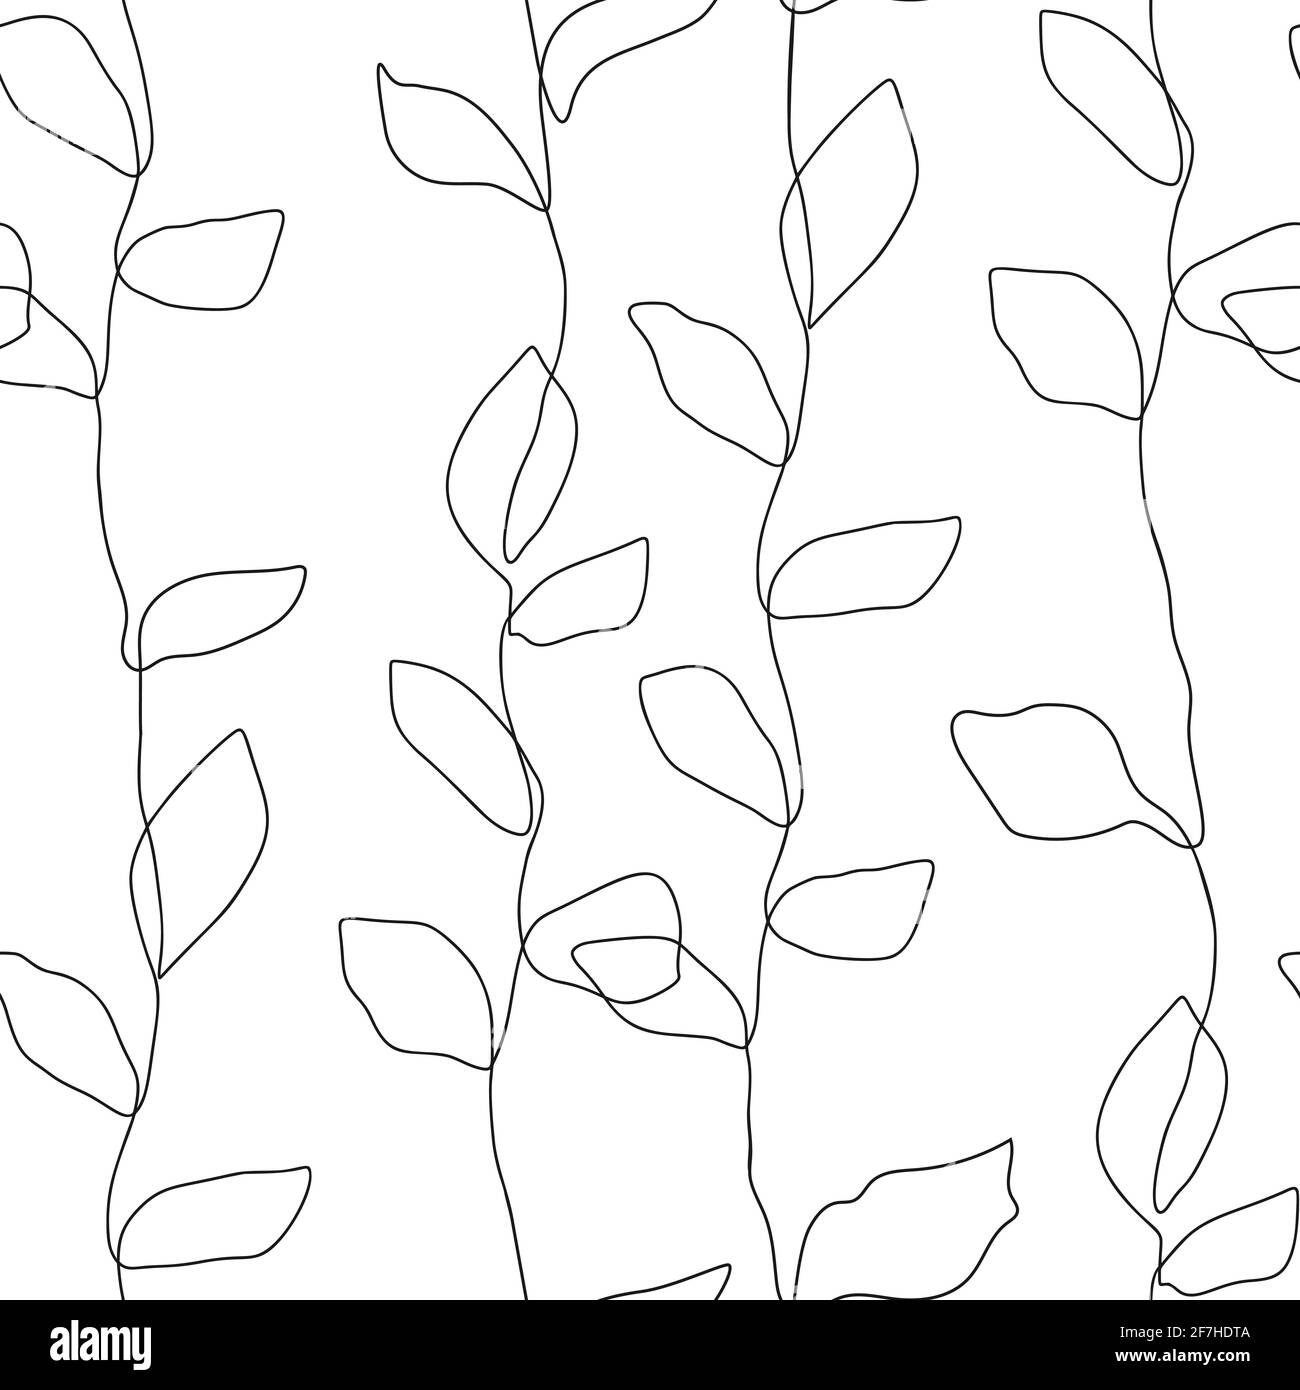 Abstract nature one line leaf vector design. Leaves seamless pattern background. Minimalist shape print Stock Vector